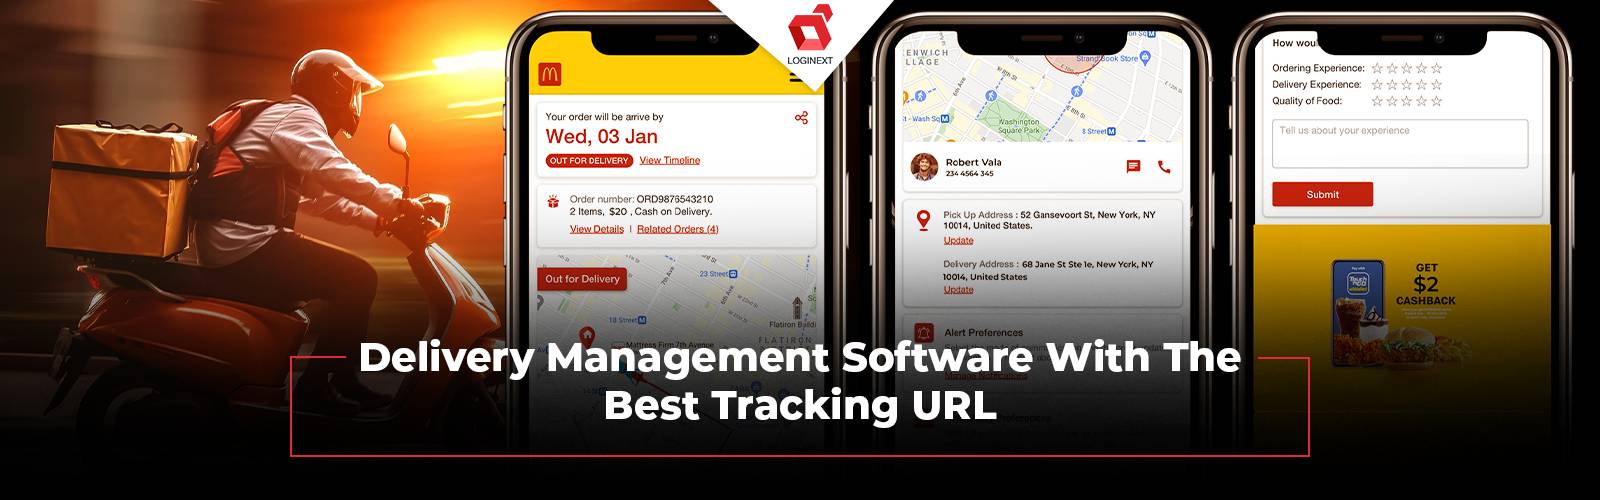 Delivery Management Software With The Best Live Tracking URL